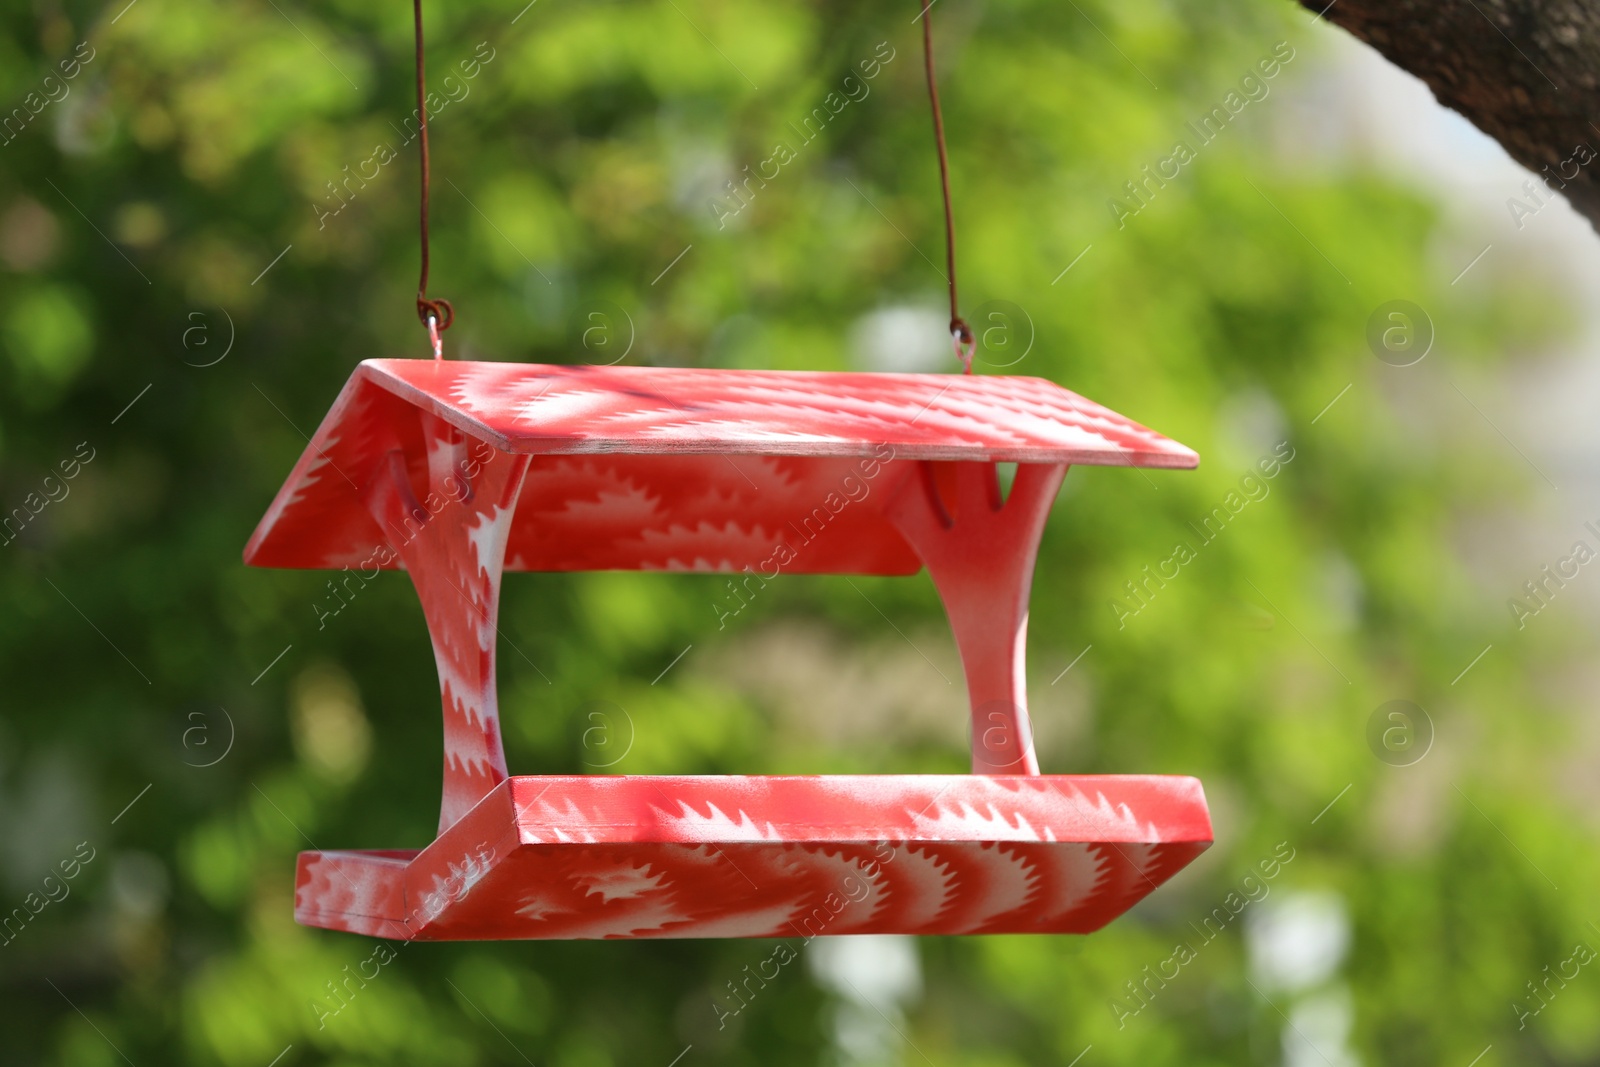 Photo of Color handmade bird feeder hanging outdoors on sunny day